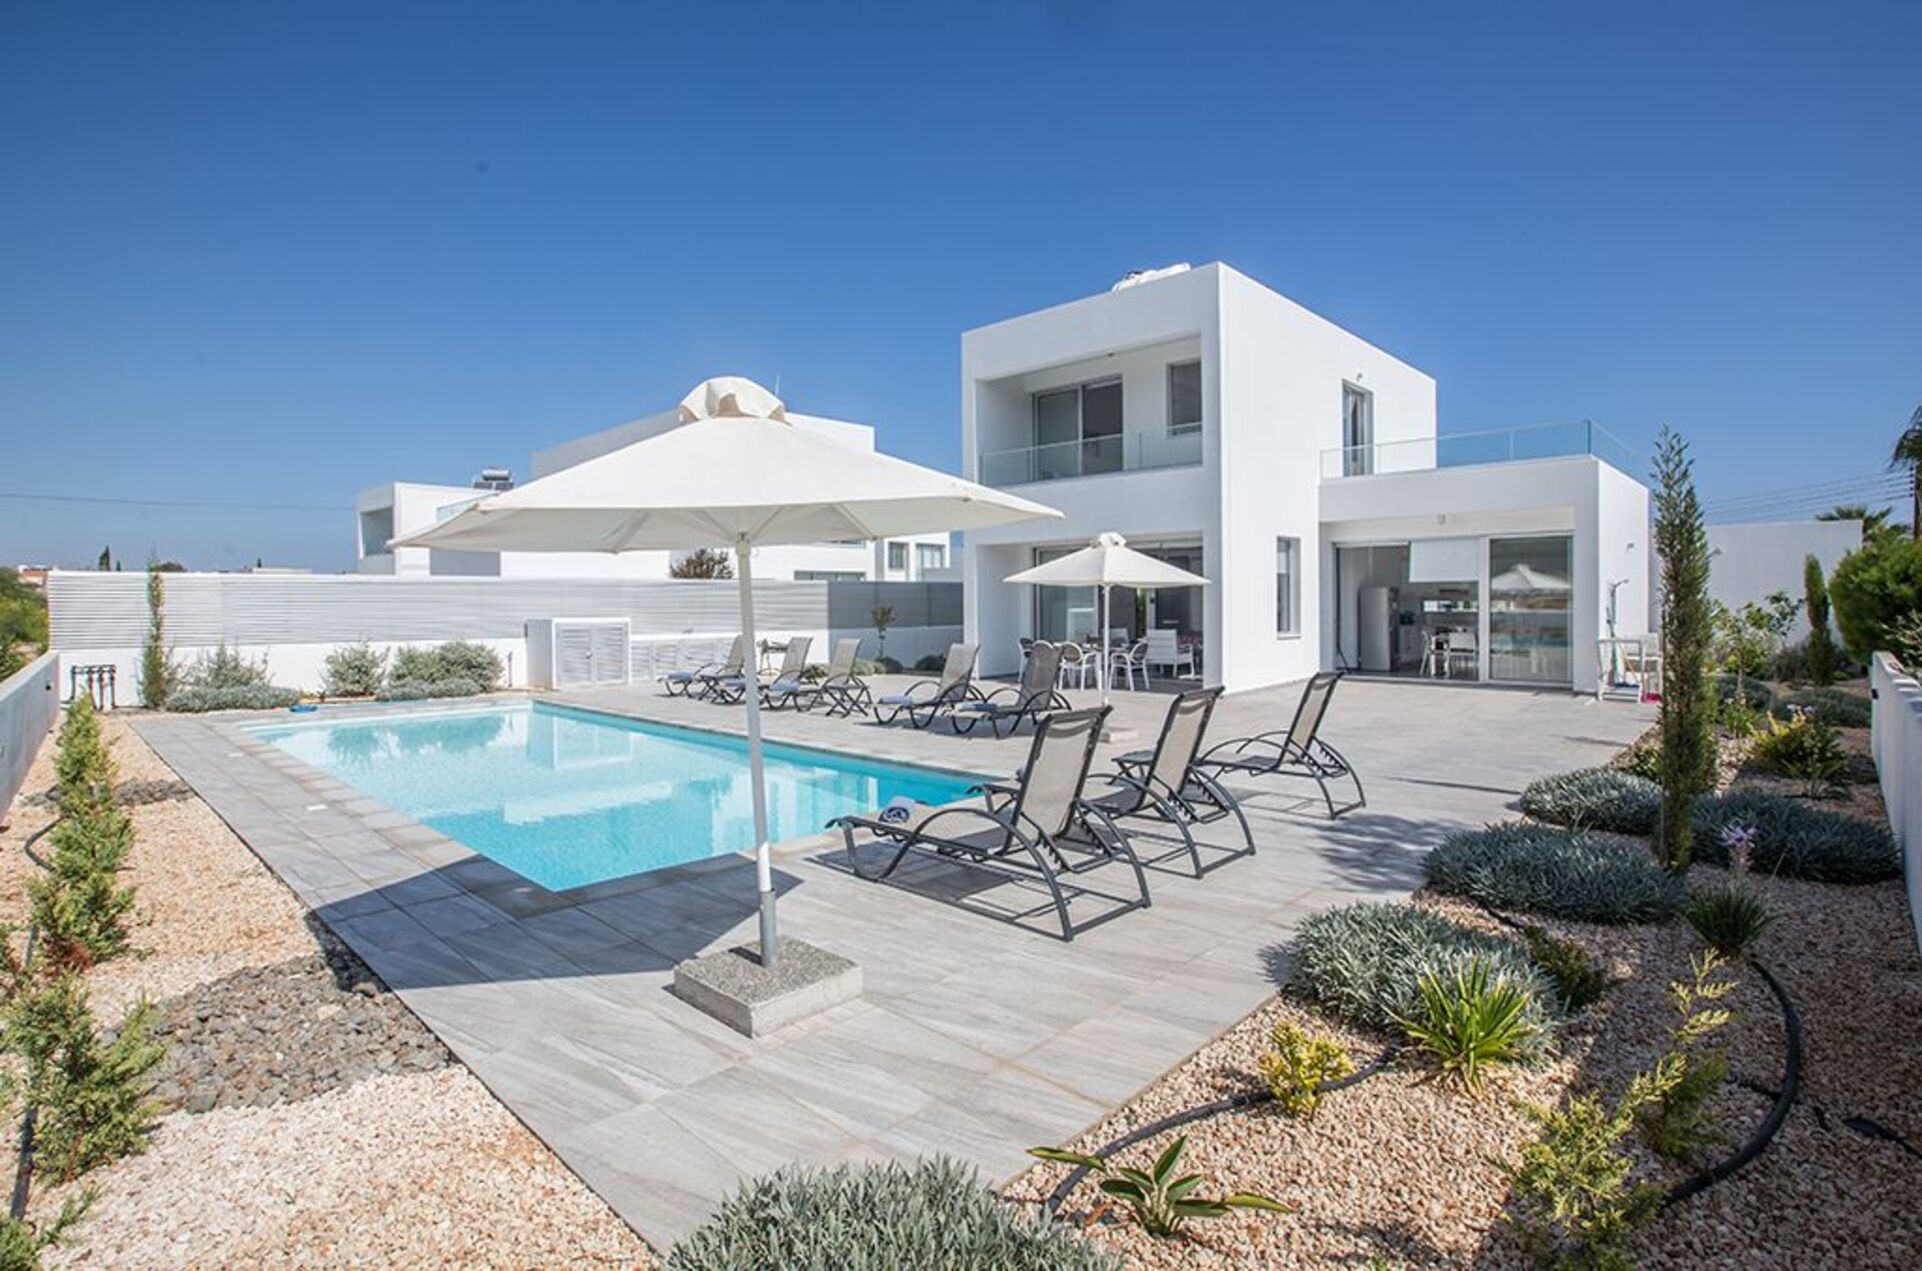 Property Image 1 - Rent Your Dream Protaras Holiday Villa and Look Forward to Relaxing Beside Your Private Pool, Protaras Vil